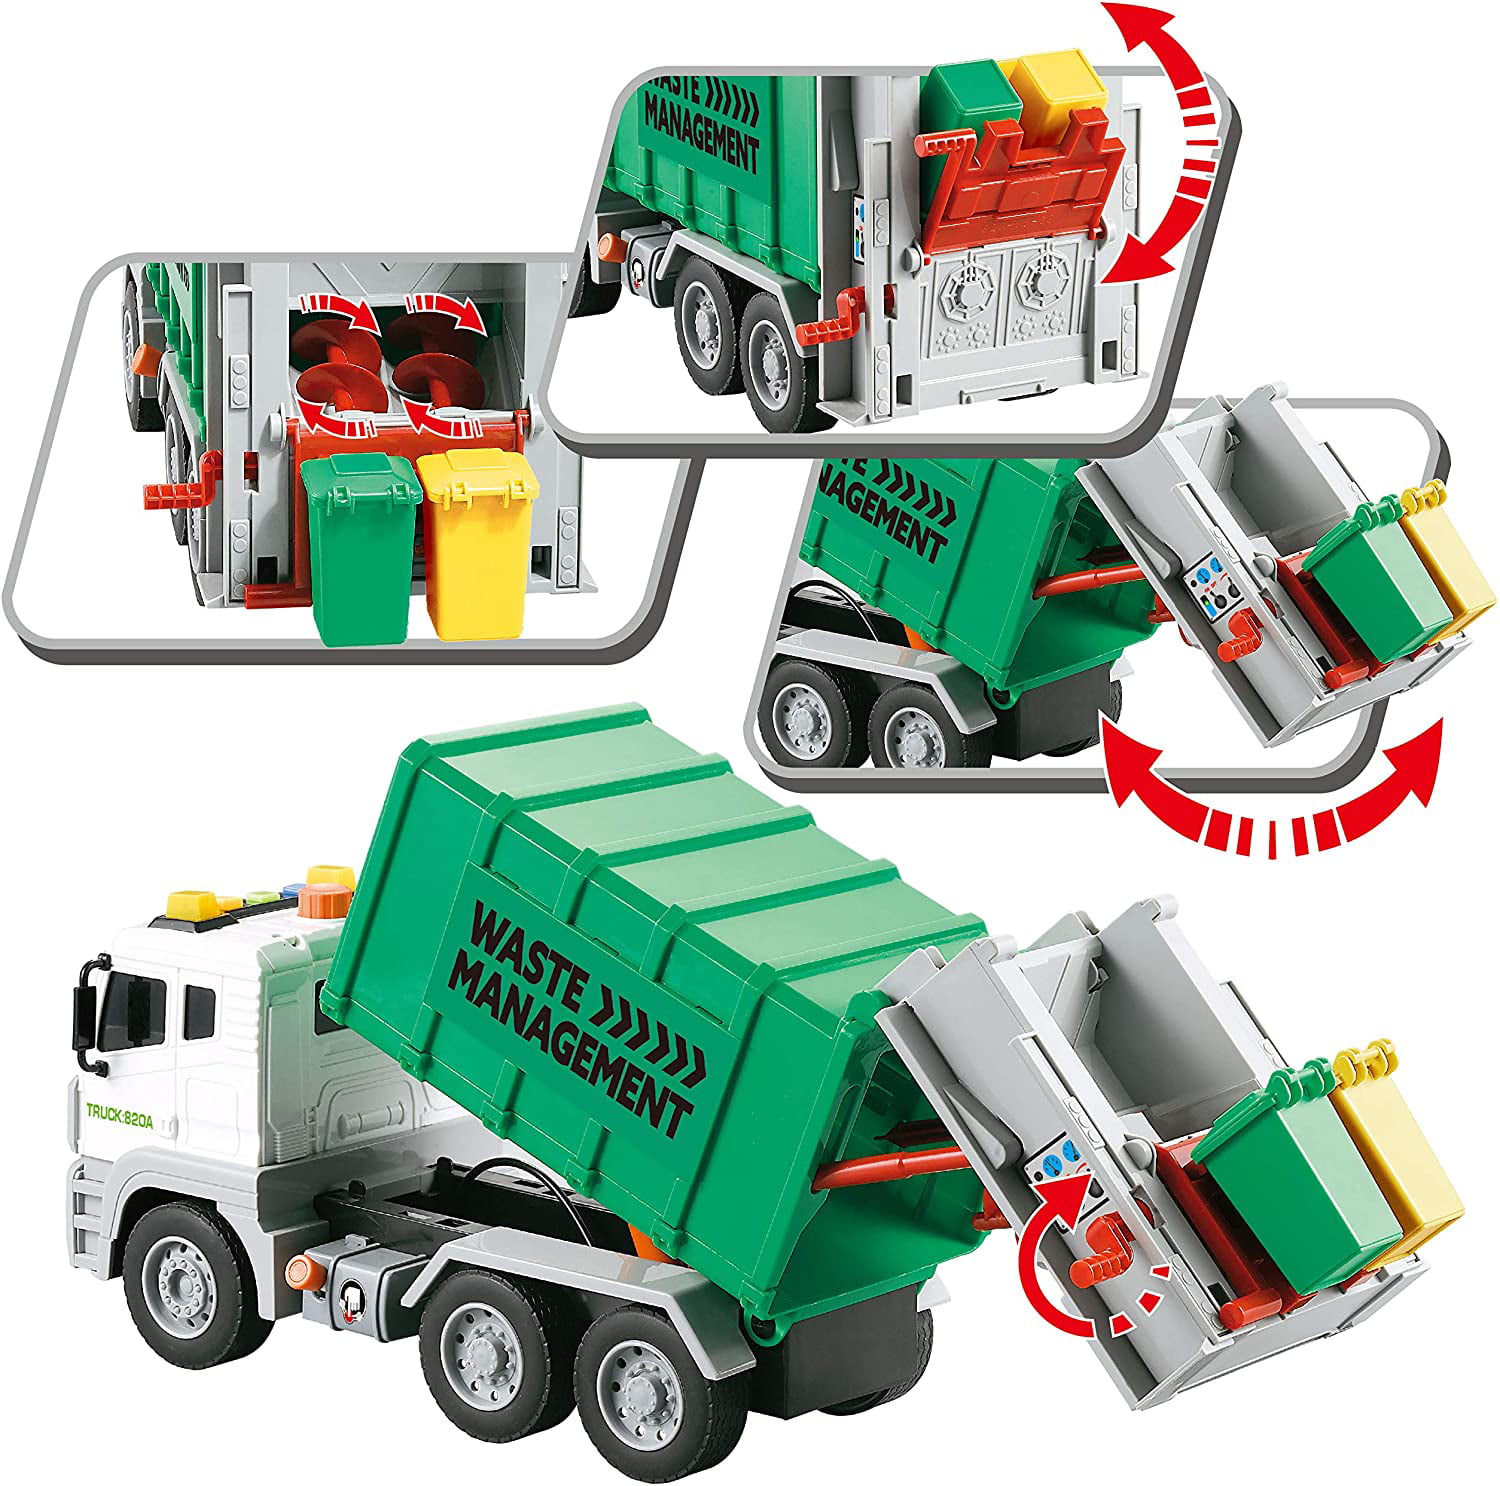 4 TRASH CANS for Learning Waste Management Boys Girls 3 4 5 Years Old Lights Garbage Truck Friction-Powered – 1:12 SCALE Large Size Truck Toy with Sounds Recycling Truck for Toddlers Rear Loader 